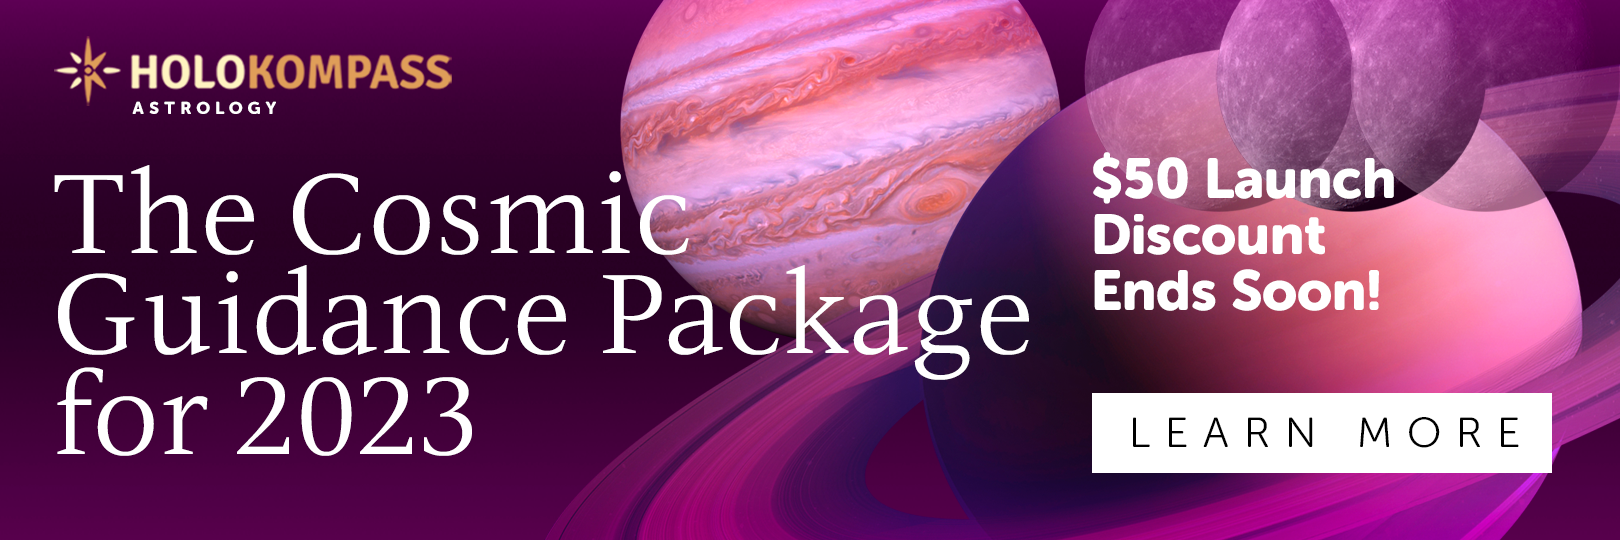 The Cosmic Guidance Package for 2023.